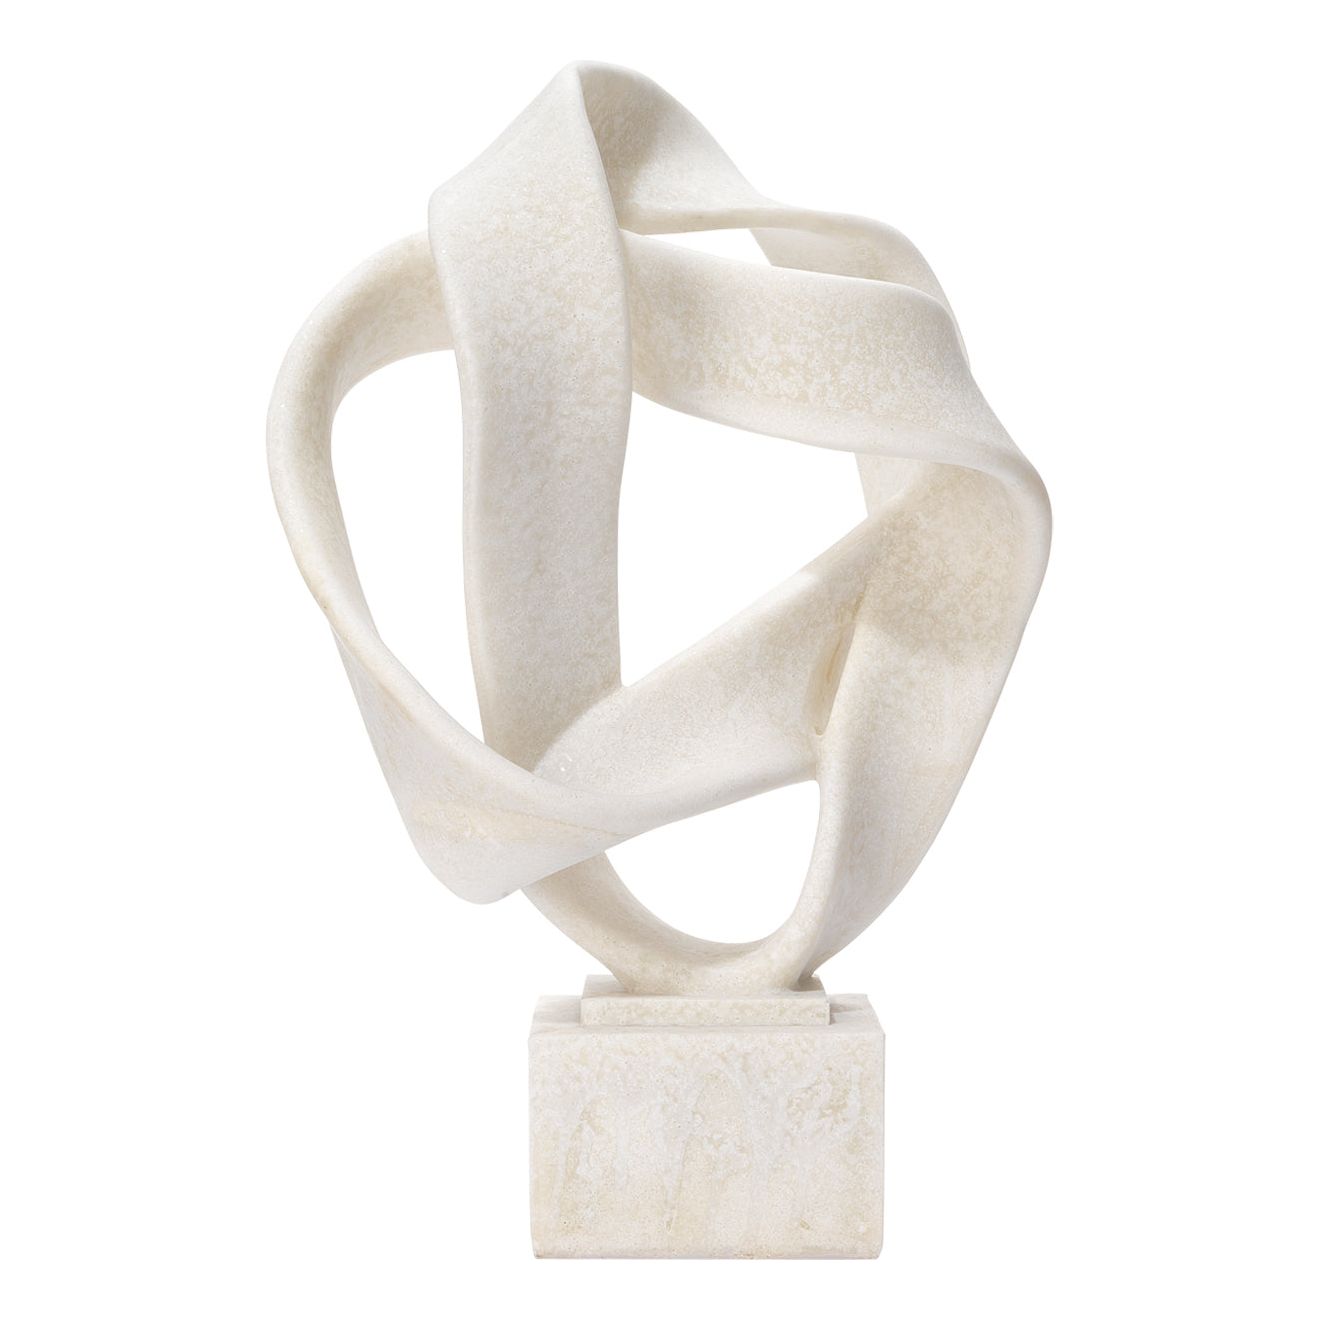 Jamie Young Company - 7INTE-OBWH - Intertwined Object on Stand - Intertwined - White